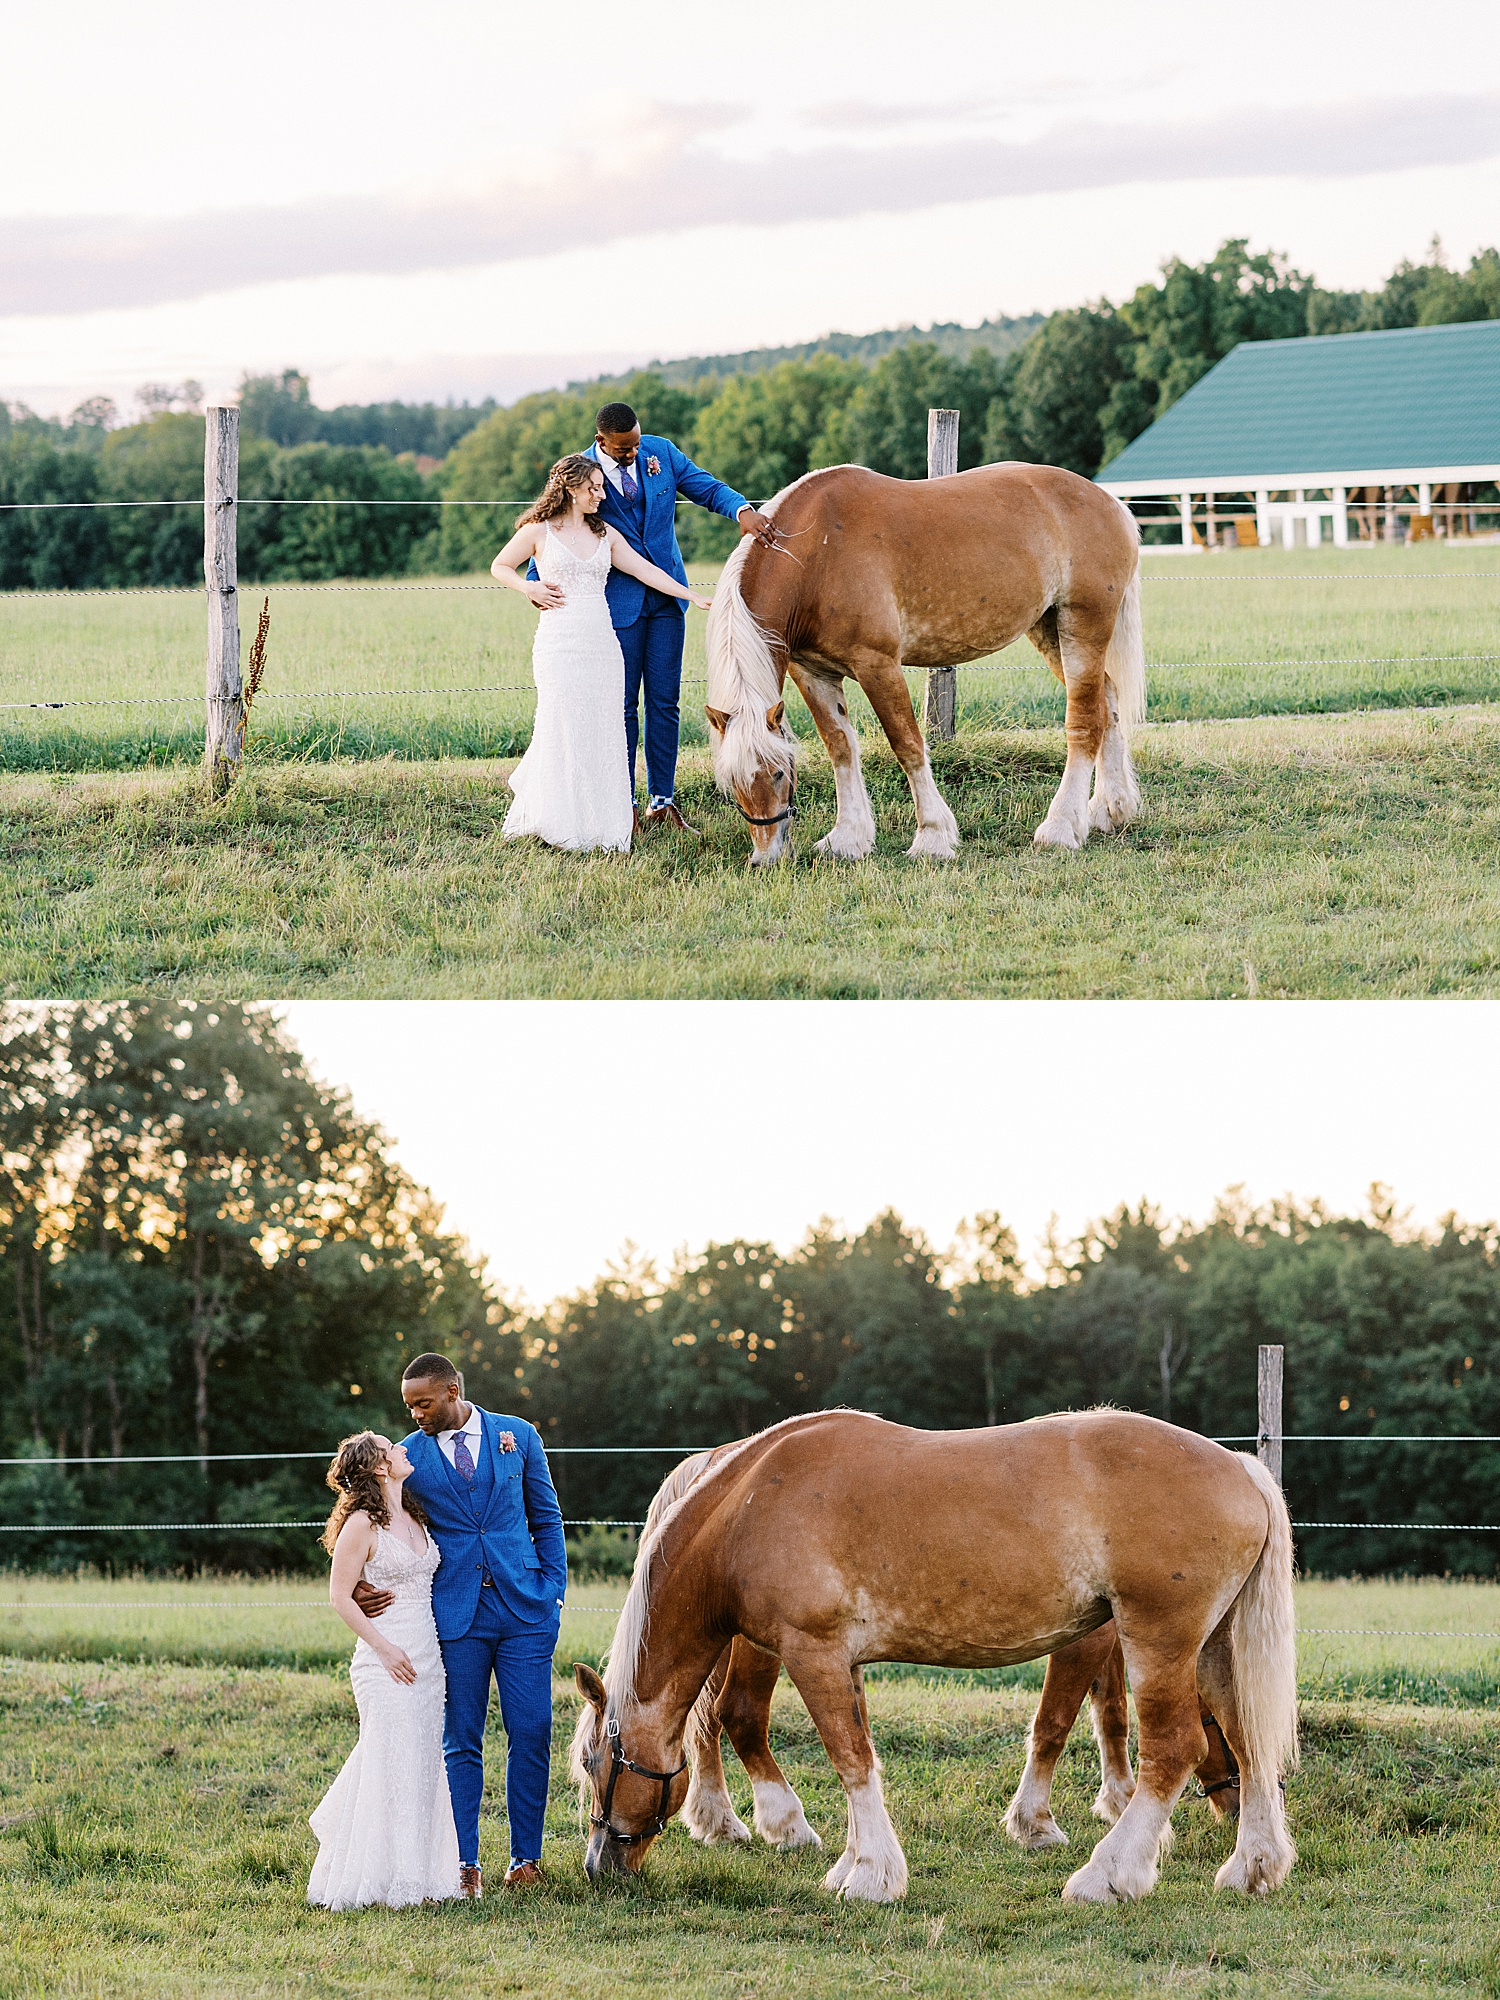 Newlyweds petting a horse in golden hour by Lynne Reznik photography 